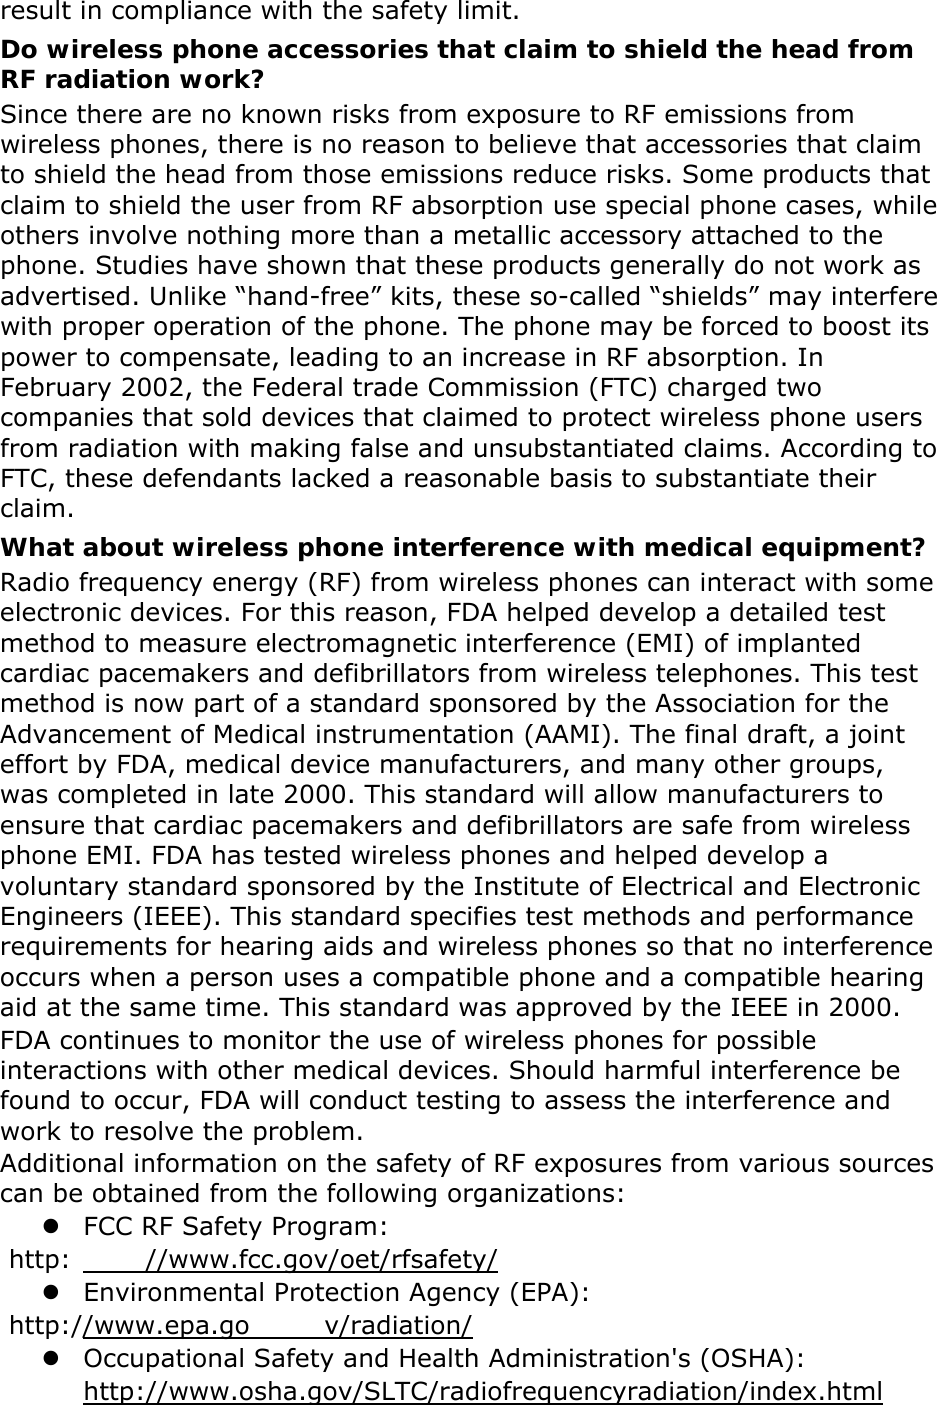 result in compliance with the safety limit. Do wireless phone accessories that claim to shield the head from RF radiation work? Since there are no known risks from exposure to RF emissions from wireless phones, there is no reason to believe that accessories that claim to shield the head from those emissions reduce risks. Some products that claim to shield the user from RF absorption use special phone cases, while others involve nothing more than a metallic accessory attached to the phone. Studies have shown that these products generally do not work as advertised. Unlike “hand-free” kits, these so-called “shields” may interfere with proper operation of the phone. The phone may be forced to boost its power to compensate, leading to an increase in RF absorption. In February 2002, the Federal trade Commission (FTC) charged two companies that sold devices that claimed to protect wireless phone users from radiation with making false and unsubstantiated claims. According to FTC, these defendants lacked a reasonable basis to substantiate their claim. What about wireless phone interference with medical equipment? Radio frequency energy (RF) from wireless phones can interact with some electronic devices. For this reason, FDA helped develop a detailed test method to measure electromagnetic interference (EMI) of implanted cardiac pacemakers and defibrillators from wireless telephones. This test method is now part of a standard sponsored by the Association for the Advancement of Medical instrumentation (AAMI). The final draft, a joint effort by FDA, medical device manufacturers, and many other groups, was completed in late 2000. This standard will allow manufacturers to ensure that cardiac pacemakers and defibrillators are safe from wireless phone EMI. FDA has tested wireless phones and helped develop a voluntary standard sponsored by the Institute of Electrical and Electronic Engineers (IEEE). This standard specifies test methods and performance requirements for hearing aids and wireless phones so that no interference occurs when a person uses a compatible phone and a compatible hearing aid at the same time. This standard was approved by the IEEE in 2000. FDA continues to monitor the use of wireless phones for possible interactions with other medical devices. Should harmful interference be found to occur, FDA will conduct testing to assess the interference and work to resolve the problem. Additional information on the safety of RF exposures from various sources can be obtained from the following organizations:  FCC RF Safety Program:  http: //www.fcc.gov/oet/rfsafety/  Environmental Protection Agency (EPA):  http://www.epa.go v/radiation/  Occupational Safety and Health Administration&apos;s (OSHA):         http://www.osha.gov/SLTC/radiofrequencyradiation/index.html 